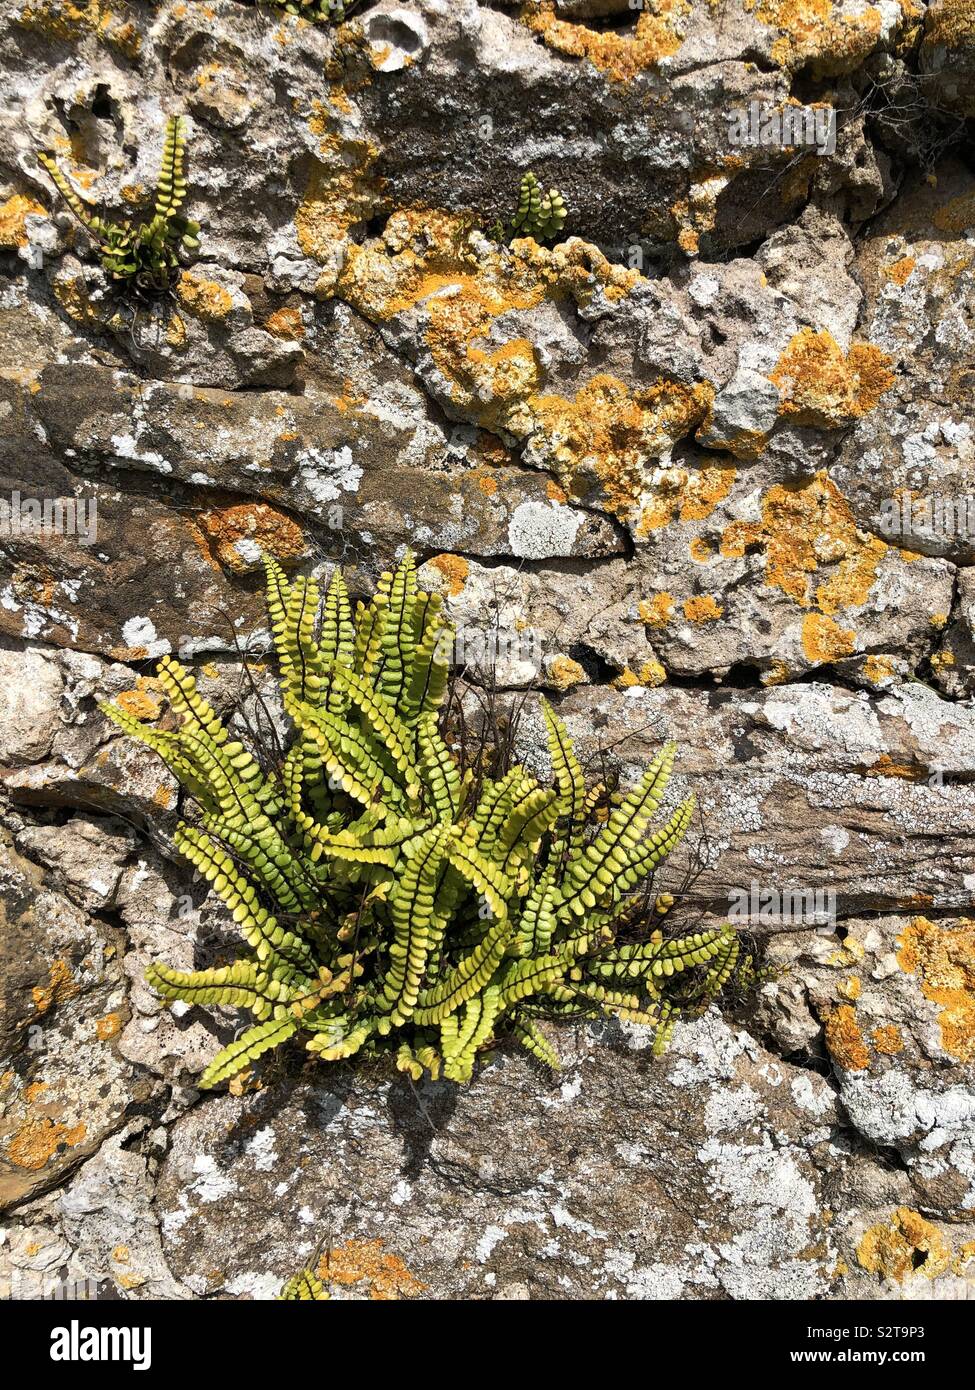 Maidenhair spleenwort and lichen colonising an old stone wall Stock Photo